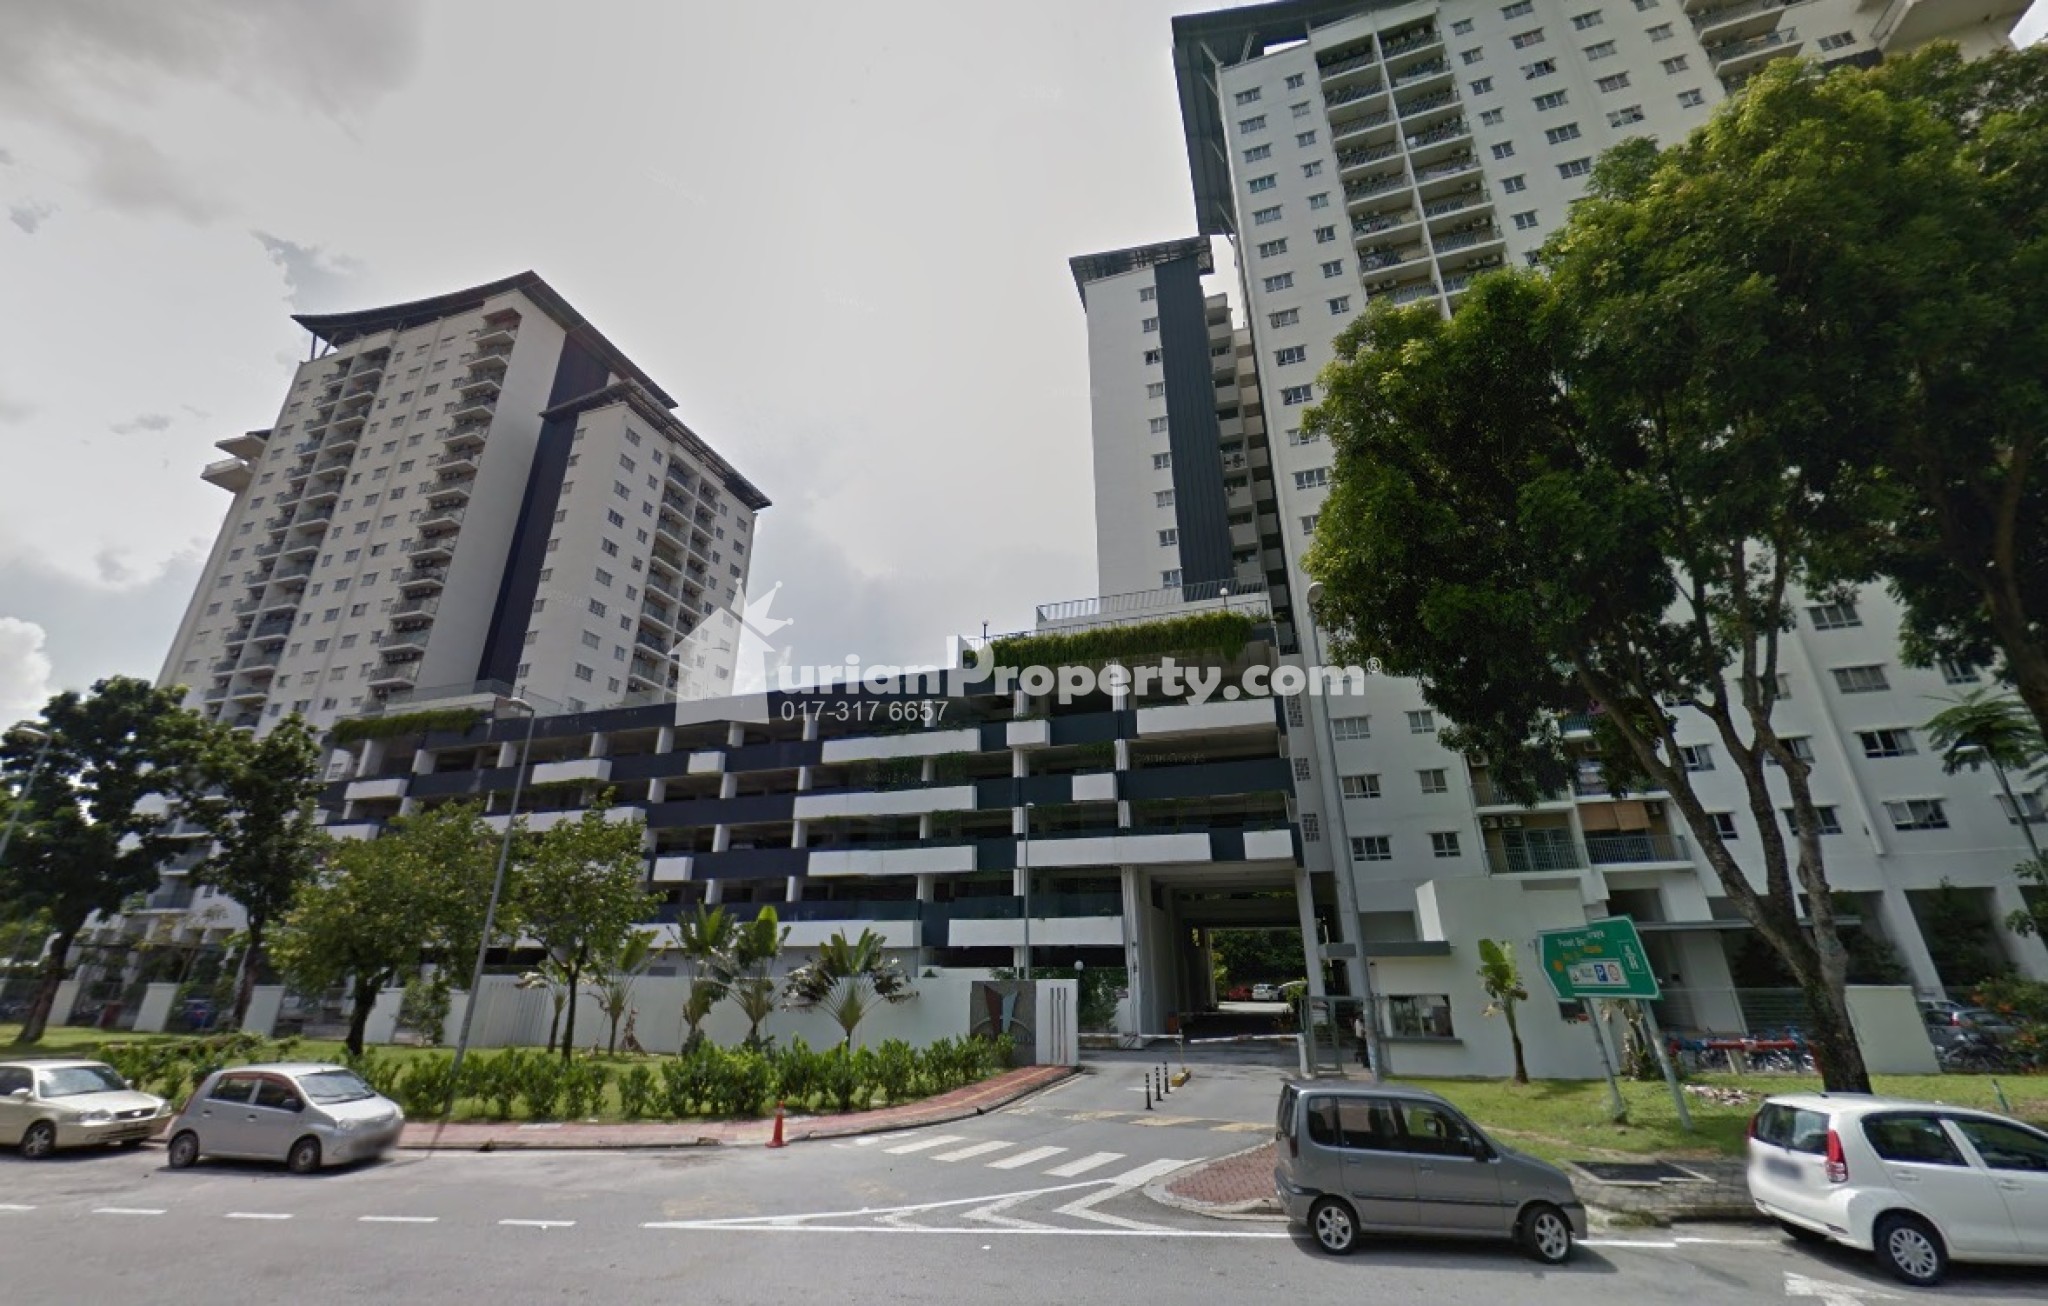 Condo For Sale at Suria Jelatek Residence